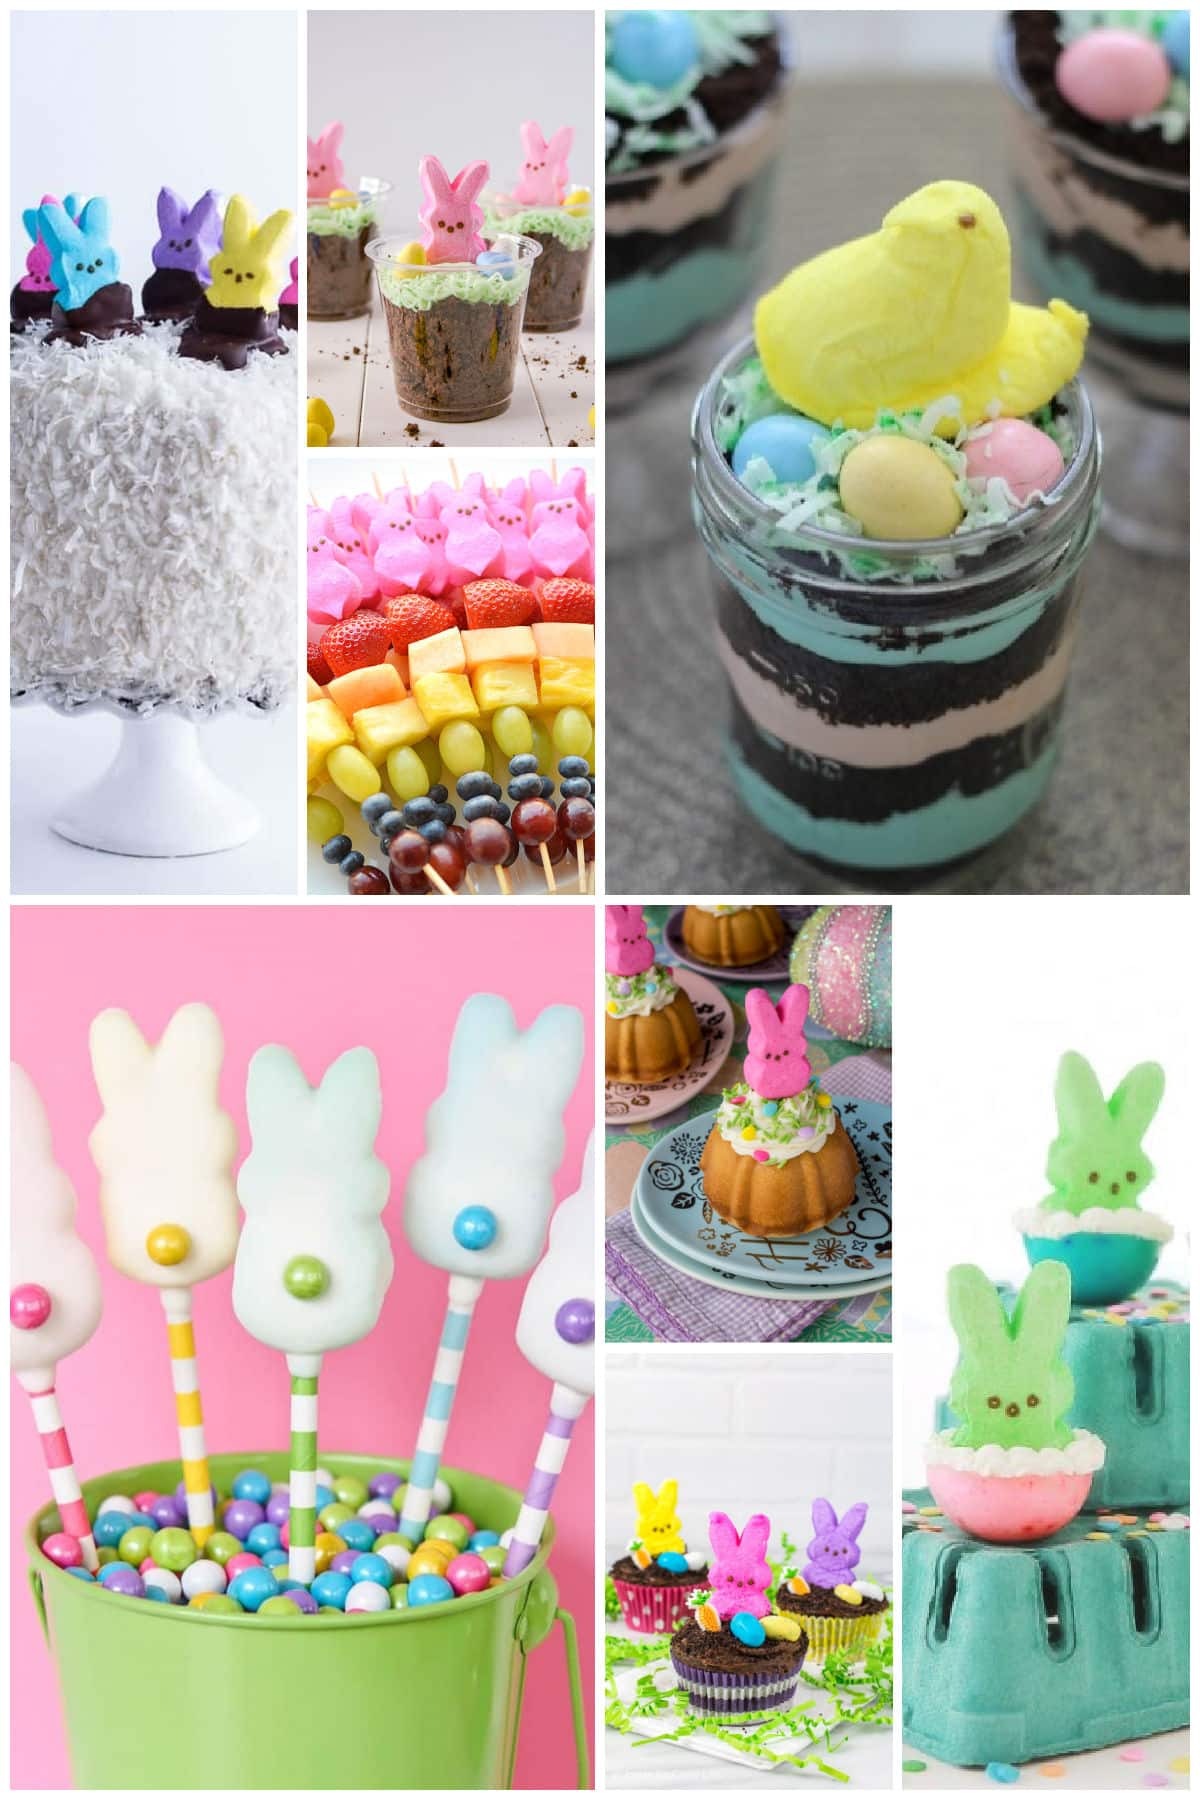 A group of irresistible Easter Peeps recipes including Easter Peeps fruit kabobs, Easter Peeps dirt pudding cups and Easter Peeps pops.